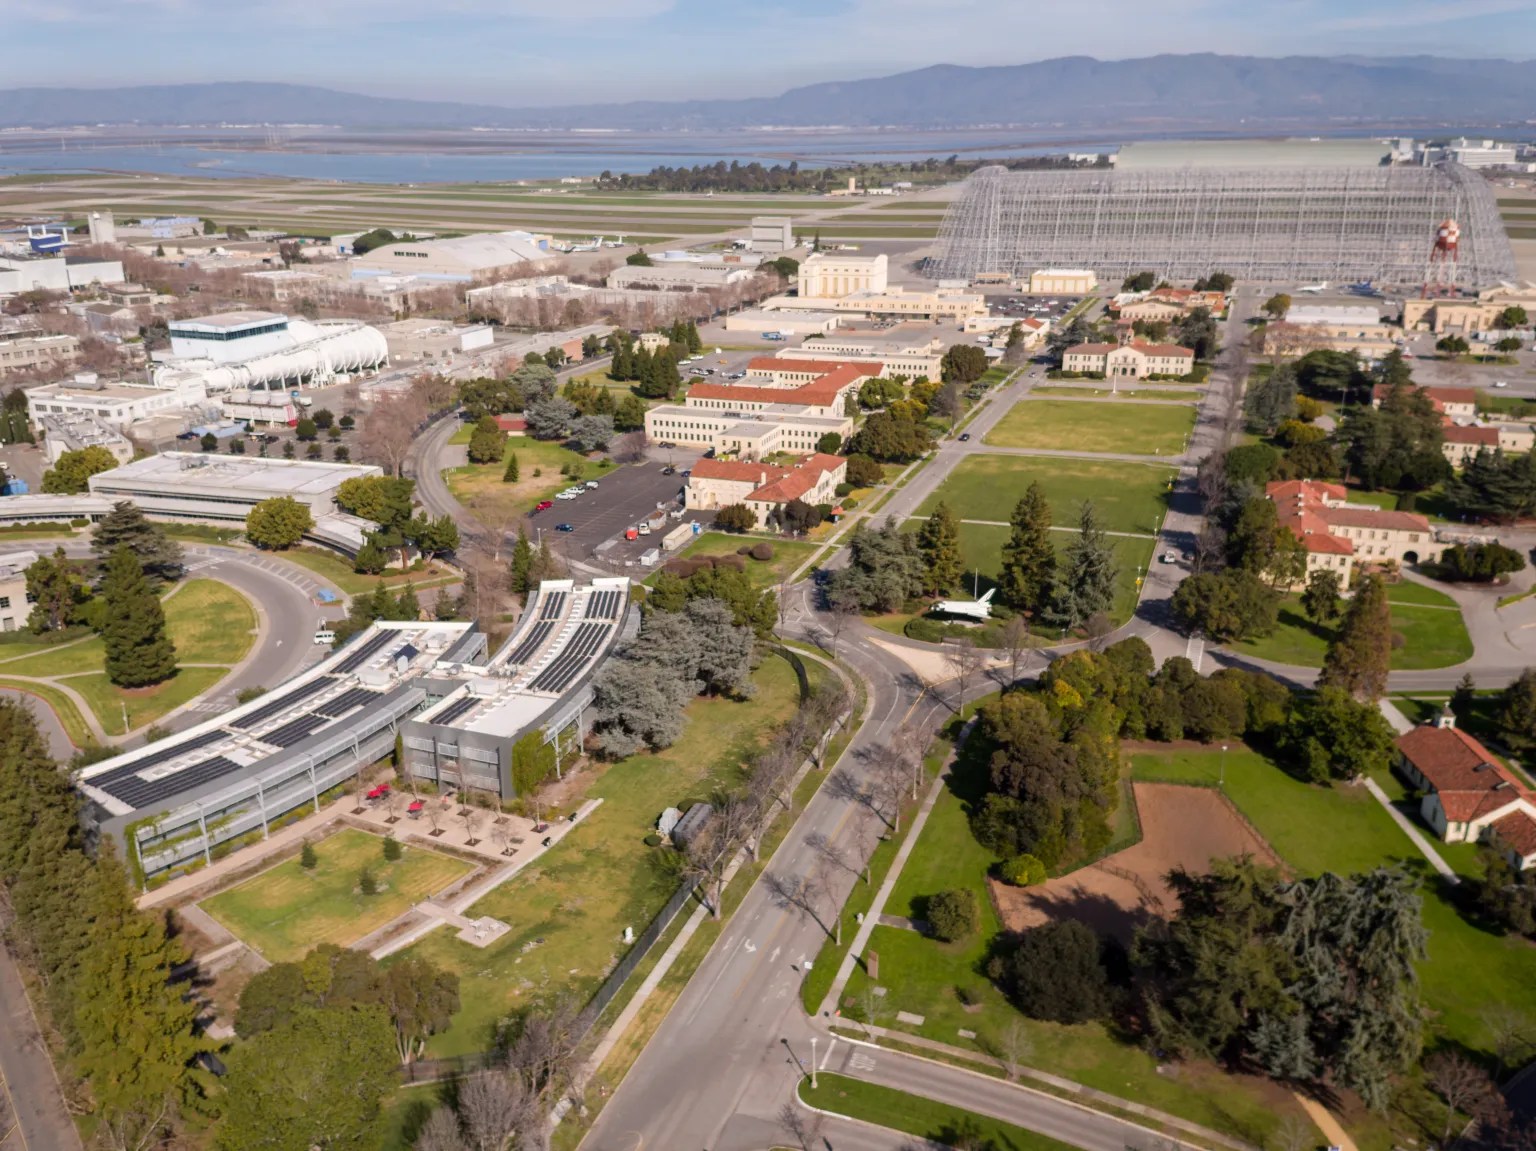 Aerial view of NASA Research Park, Moffett Field